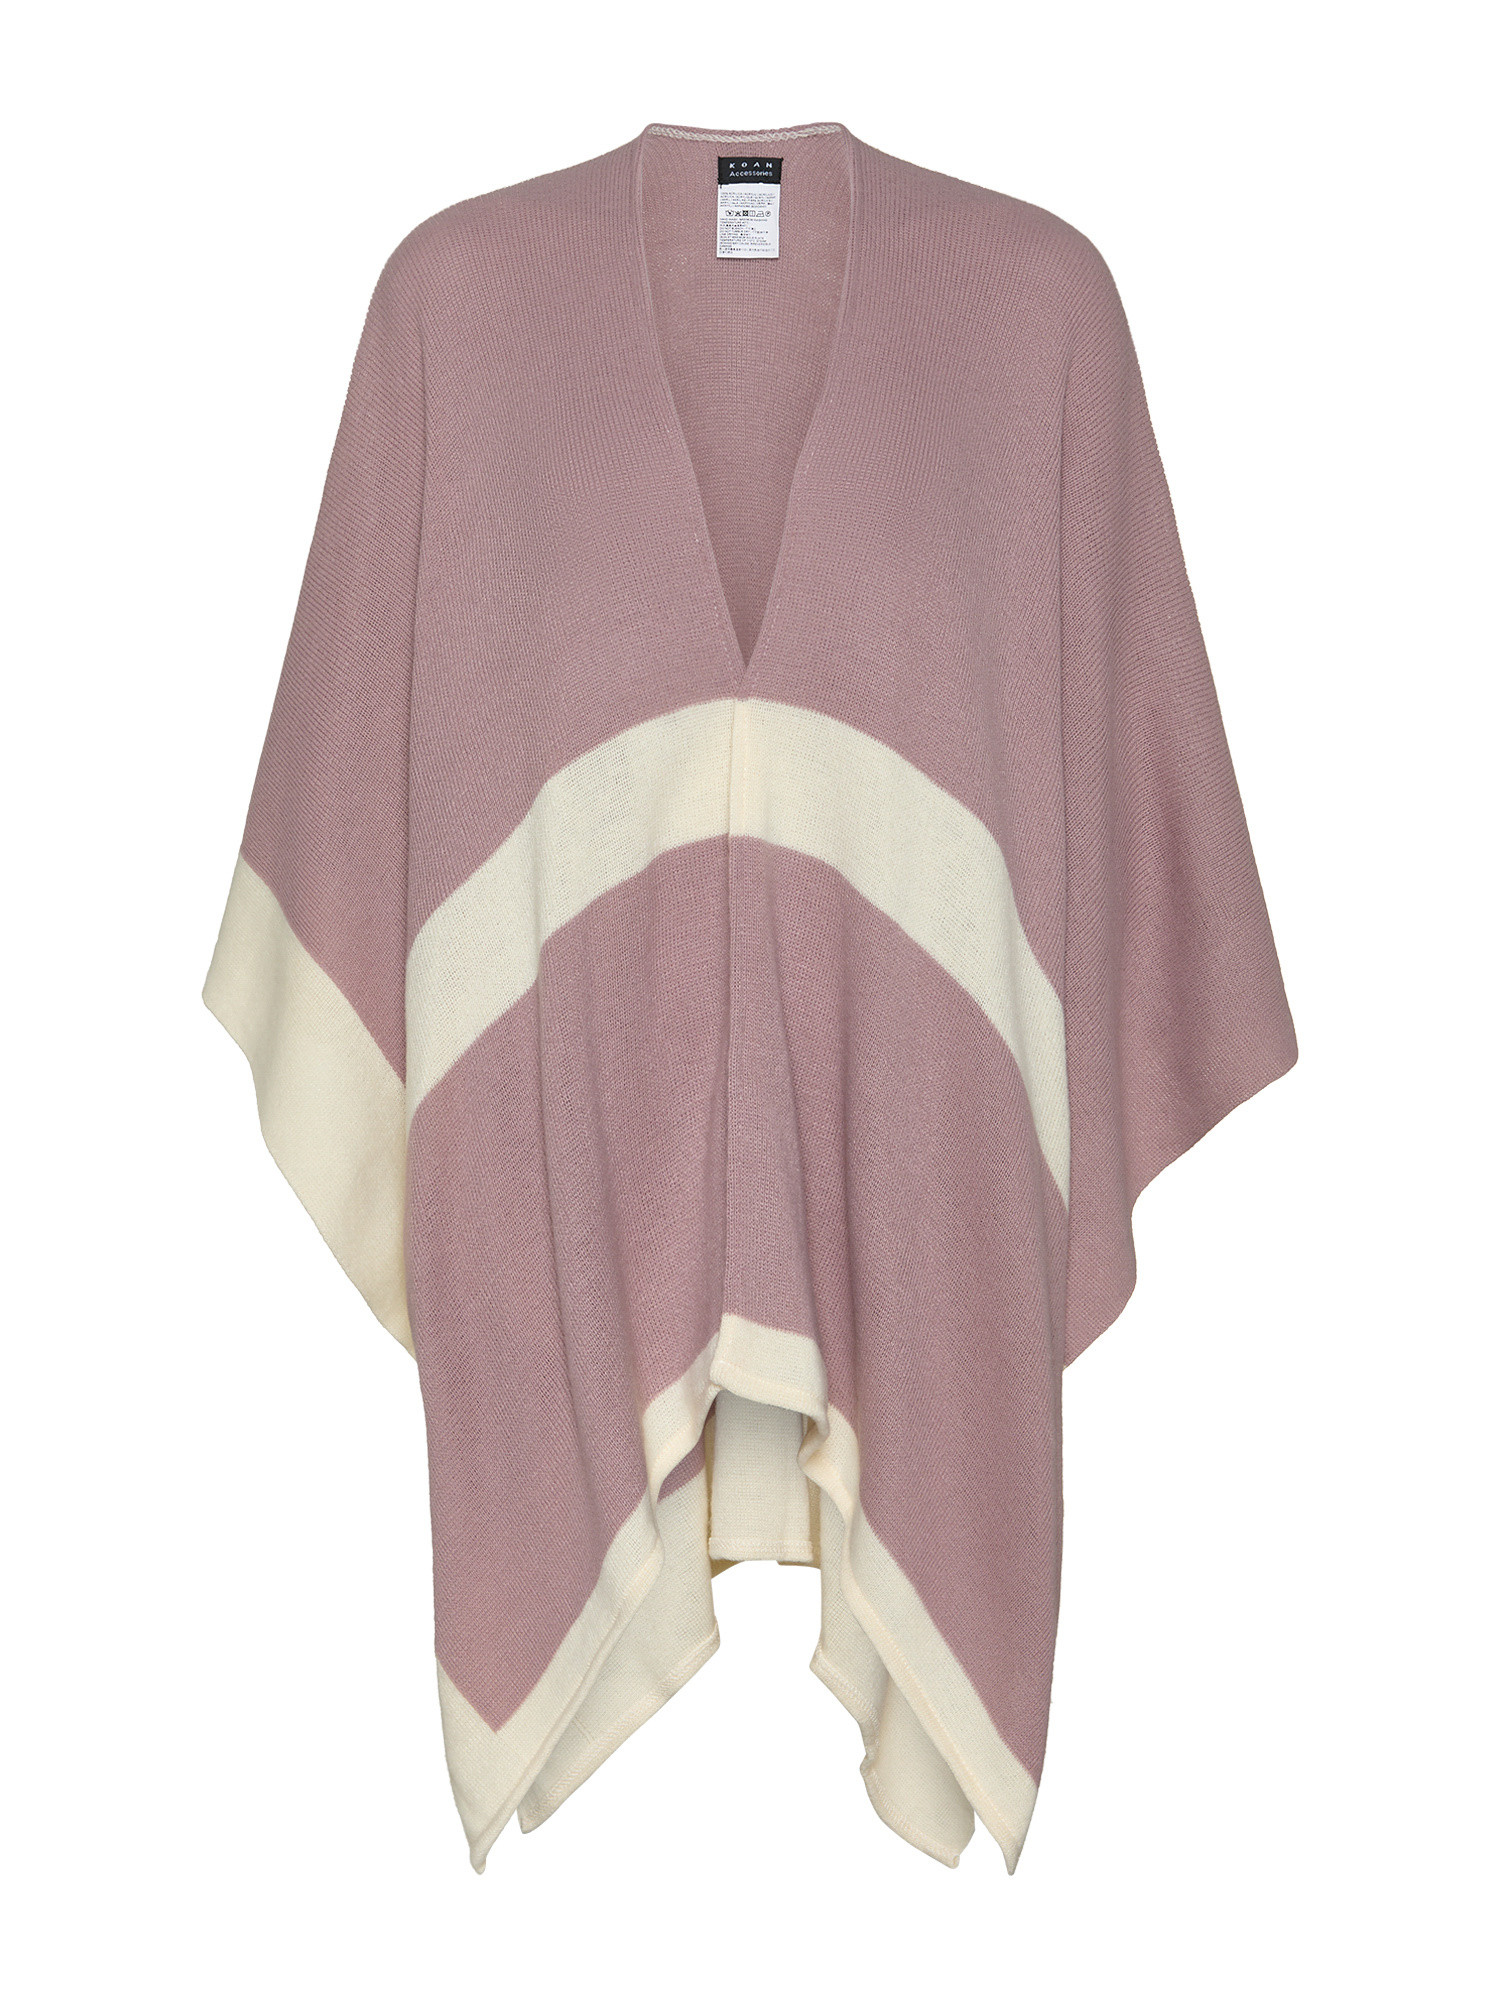 Koan - Two-tone knitted poncho, Pink, large image number 0